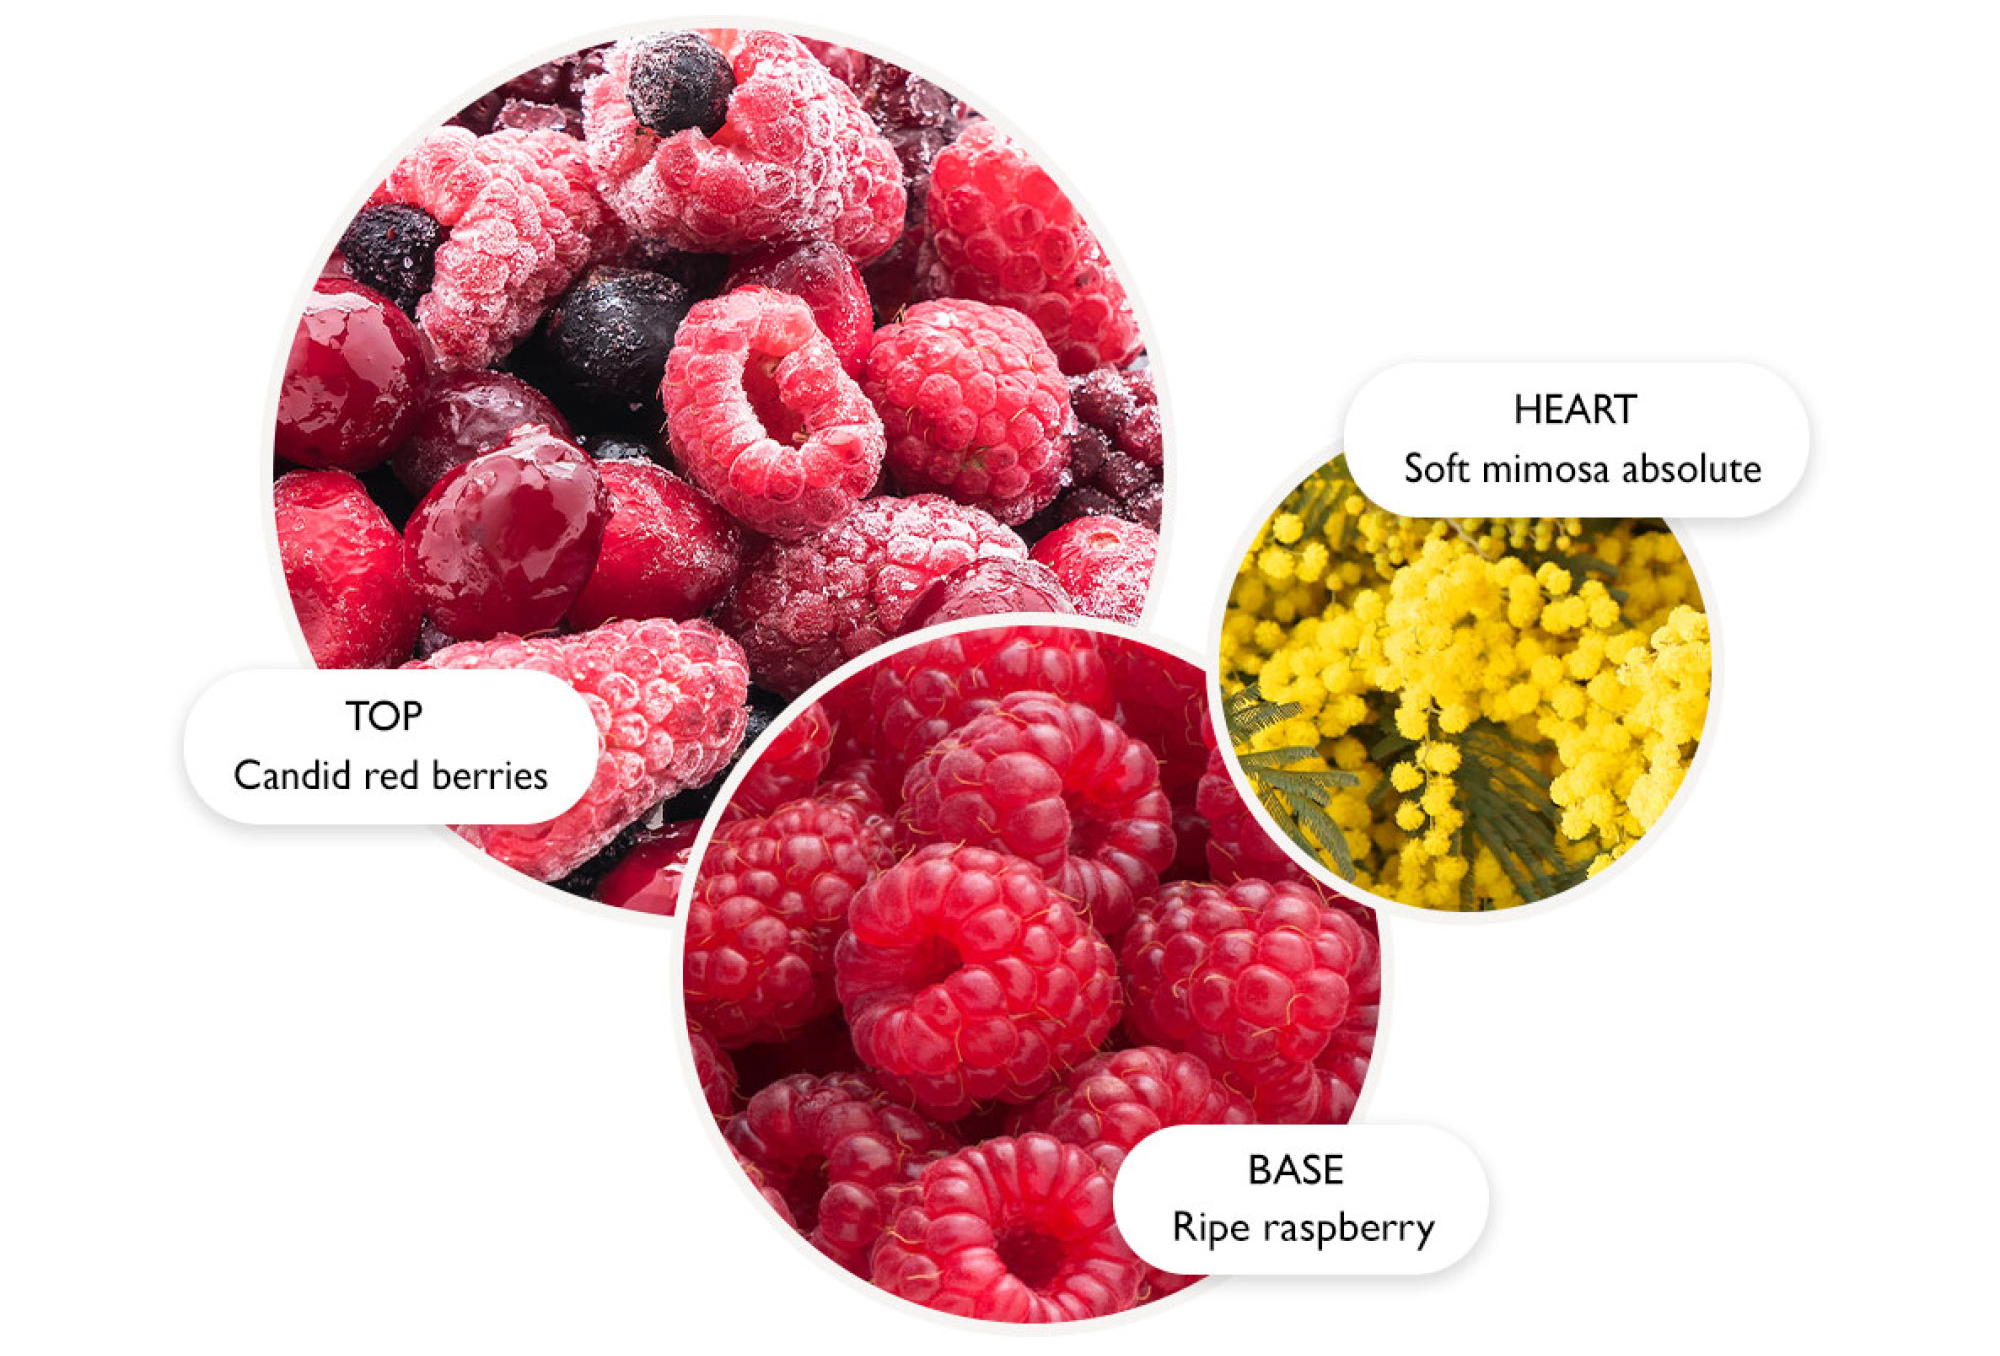 TOP Candid red berries, HEART Soft mimosa absolute, BASE Ripe raspberry